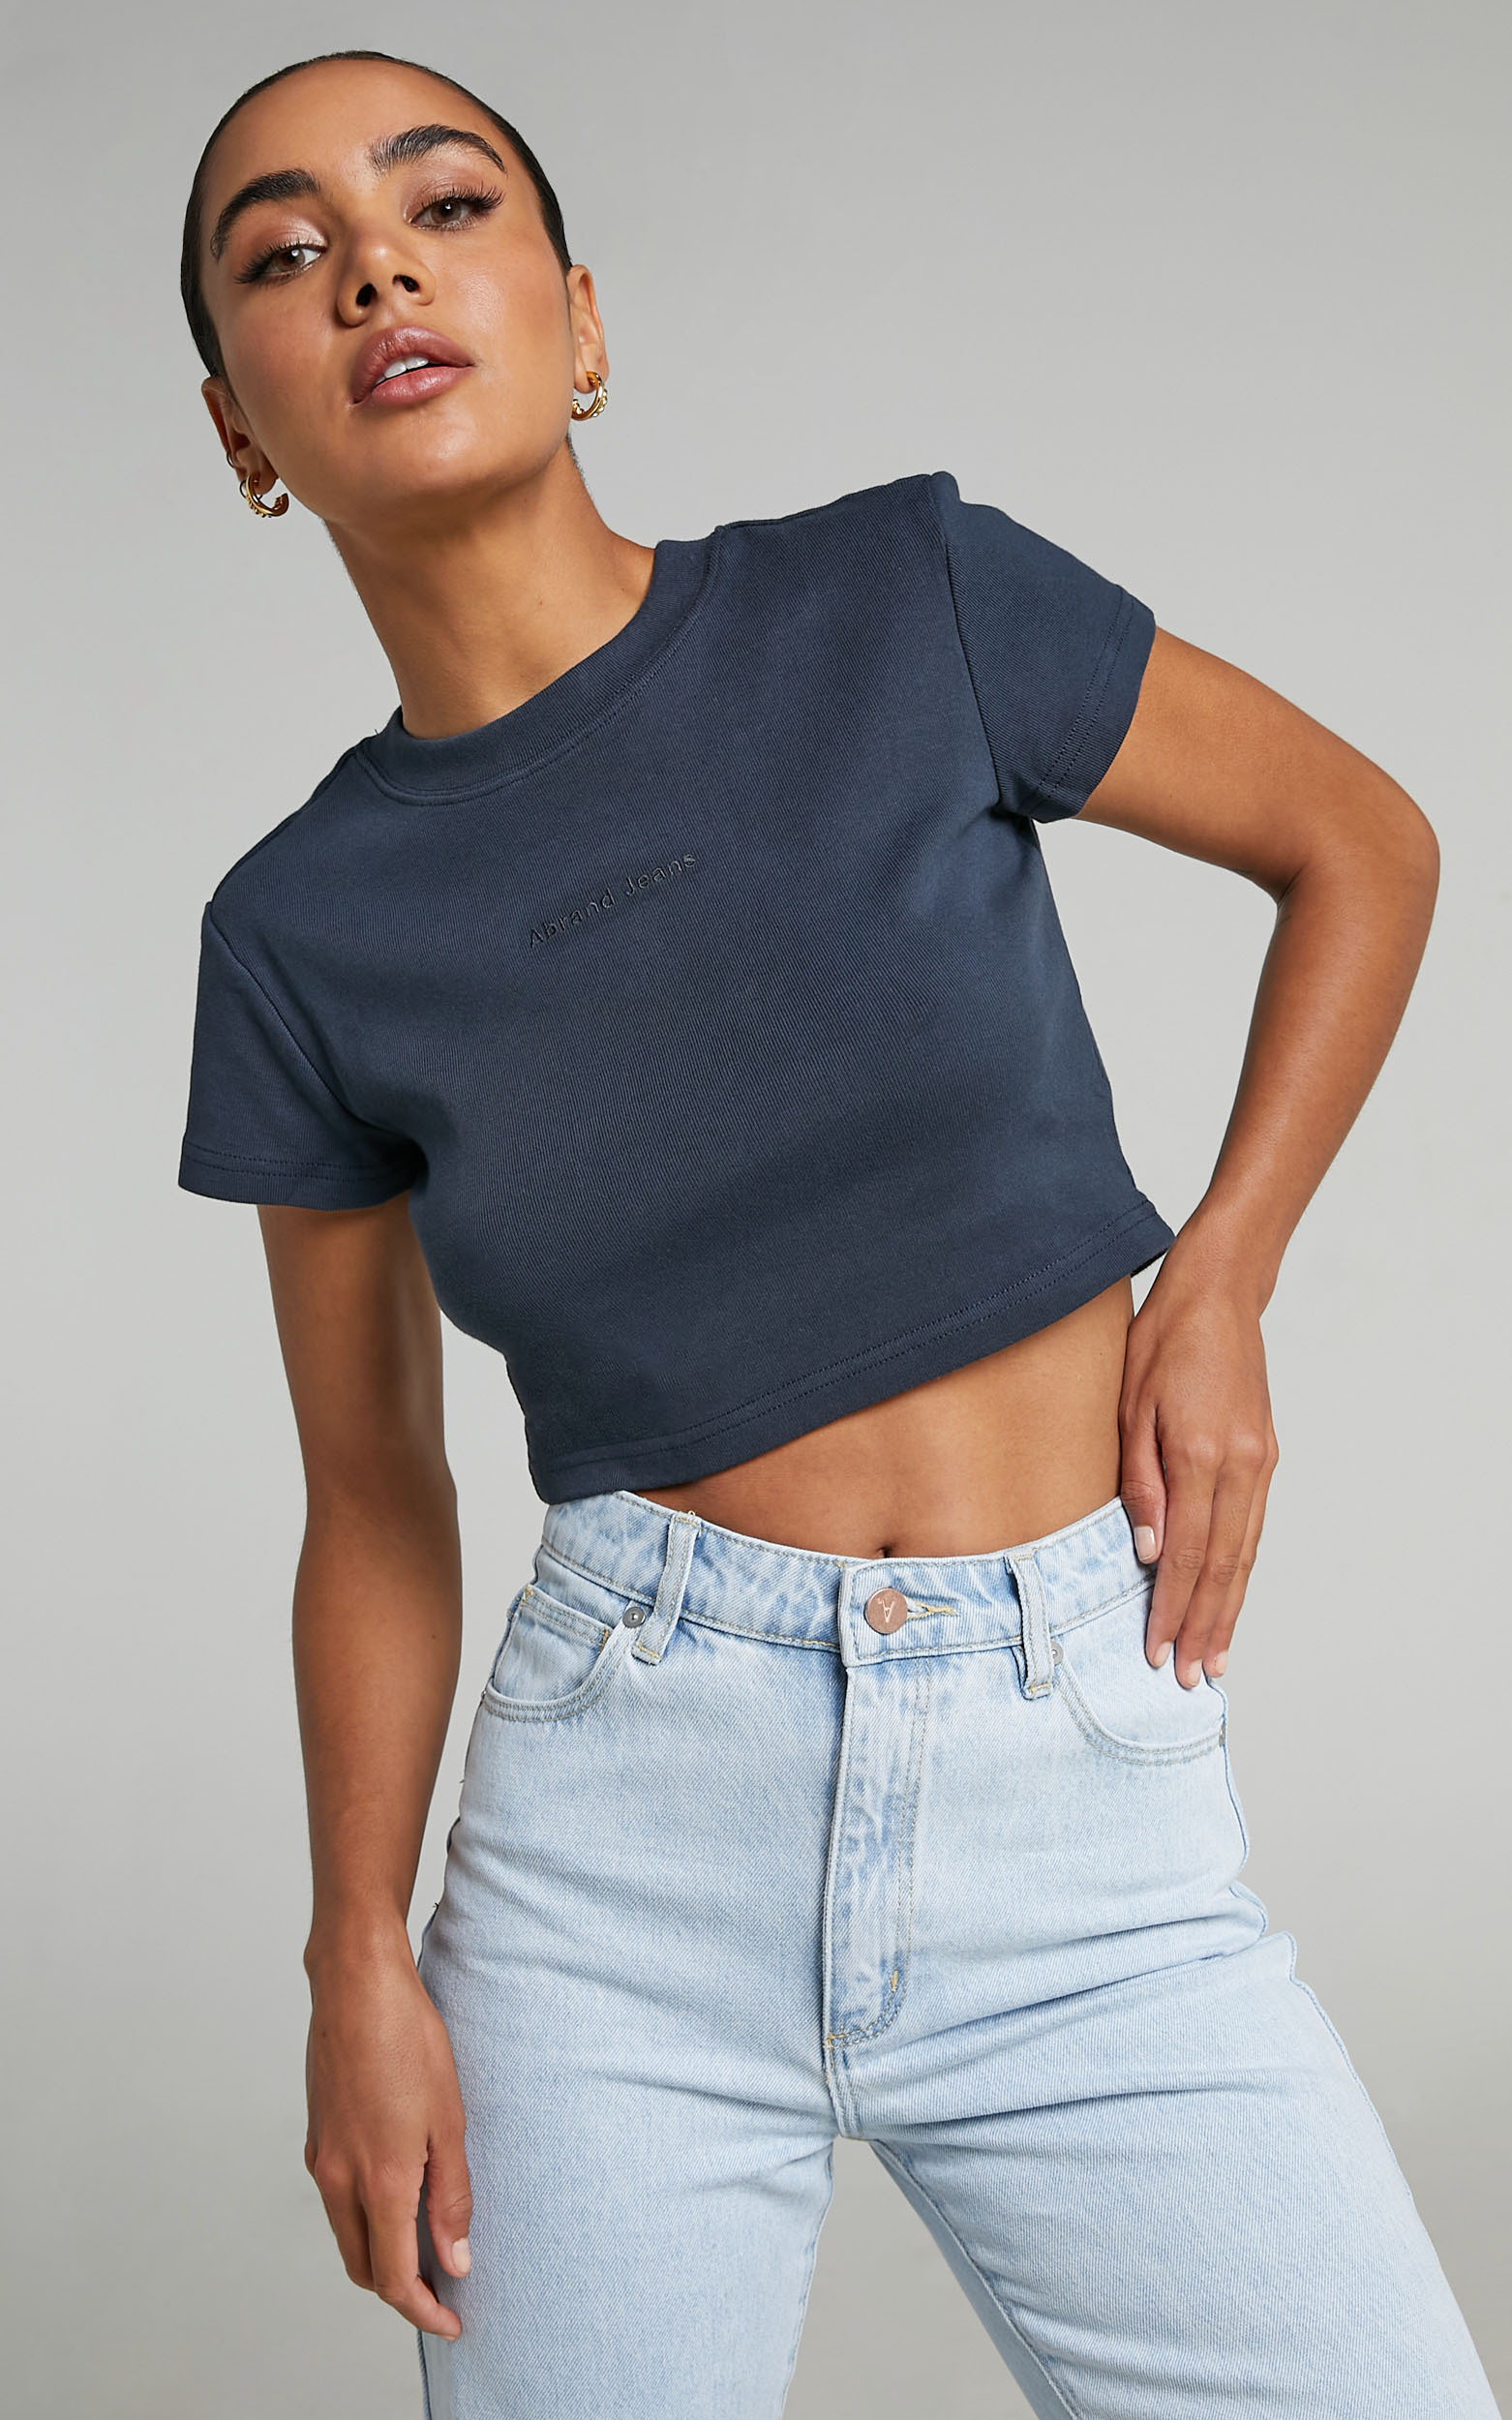 Abrand - 90s Crop Tee in 70s Navy - L, NVY1, hi-res image number null